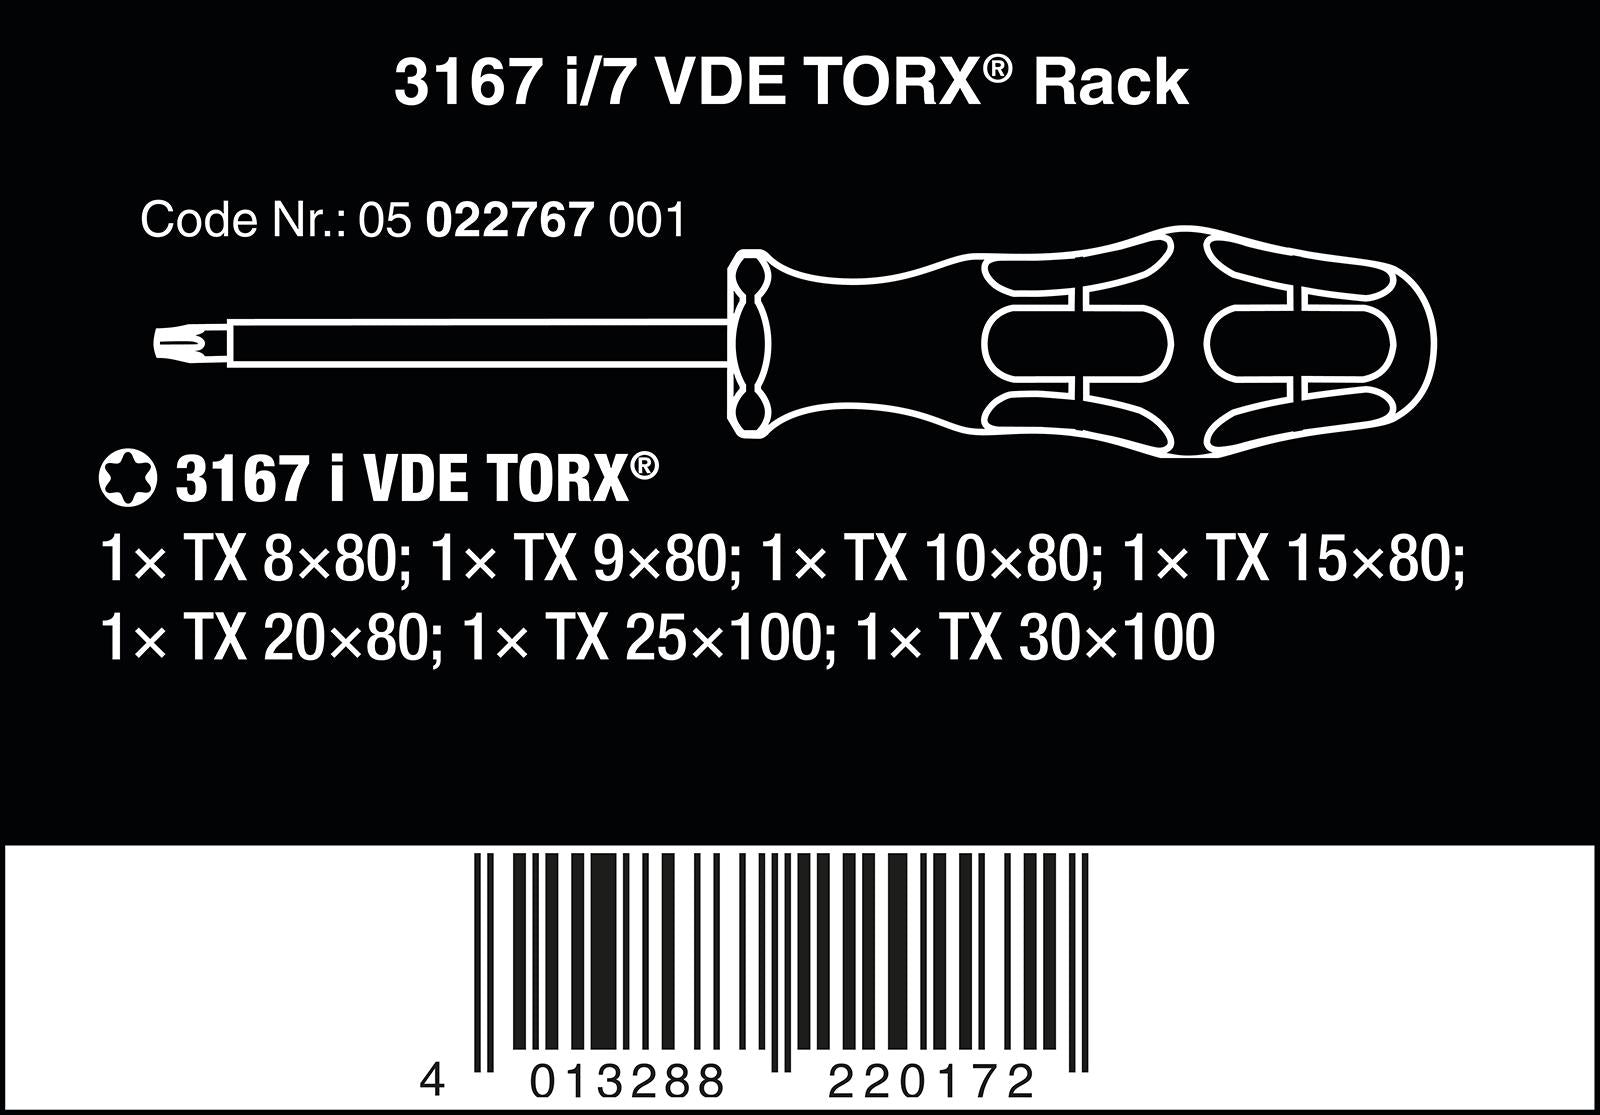 Wera Screwdriver Set VDE Insulated Stainless Steel 3167 i/7 Torx in Rack 7 Piece T8-T30